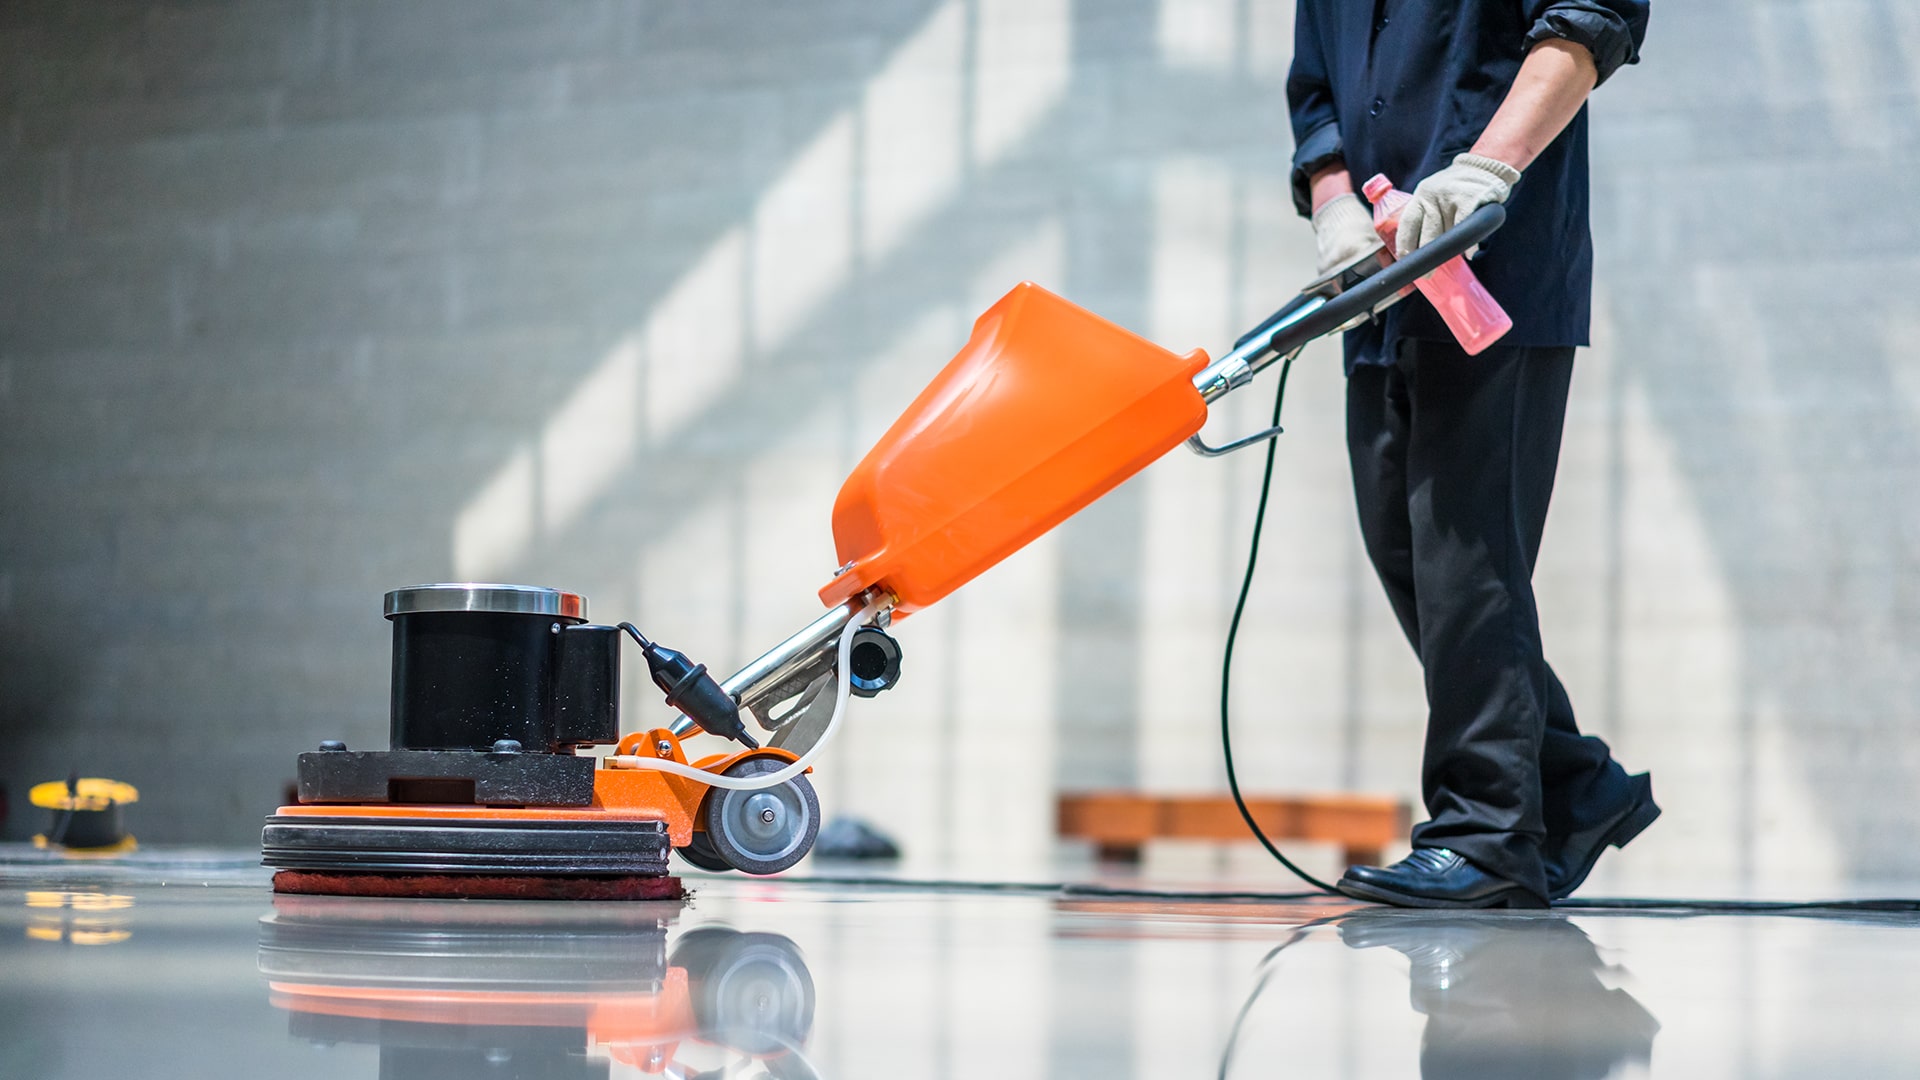 Janitorial services for office spaces, classrooms, industrial areas